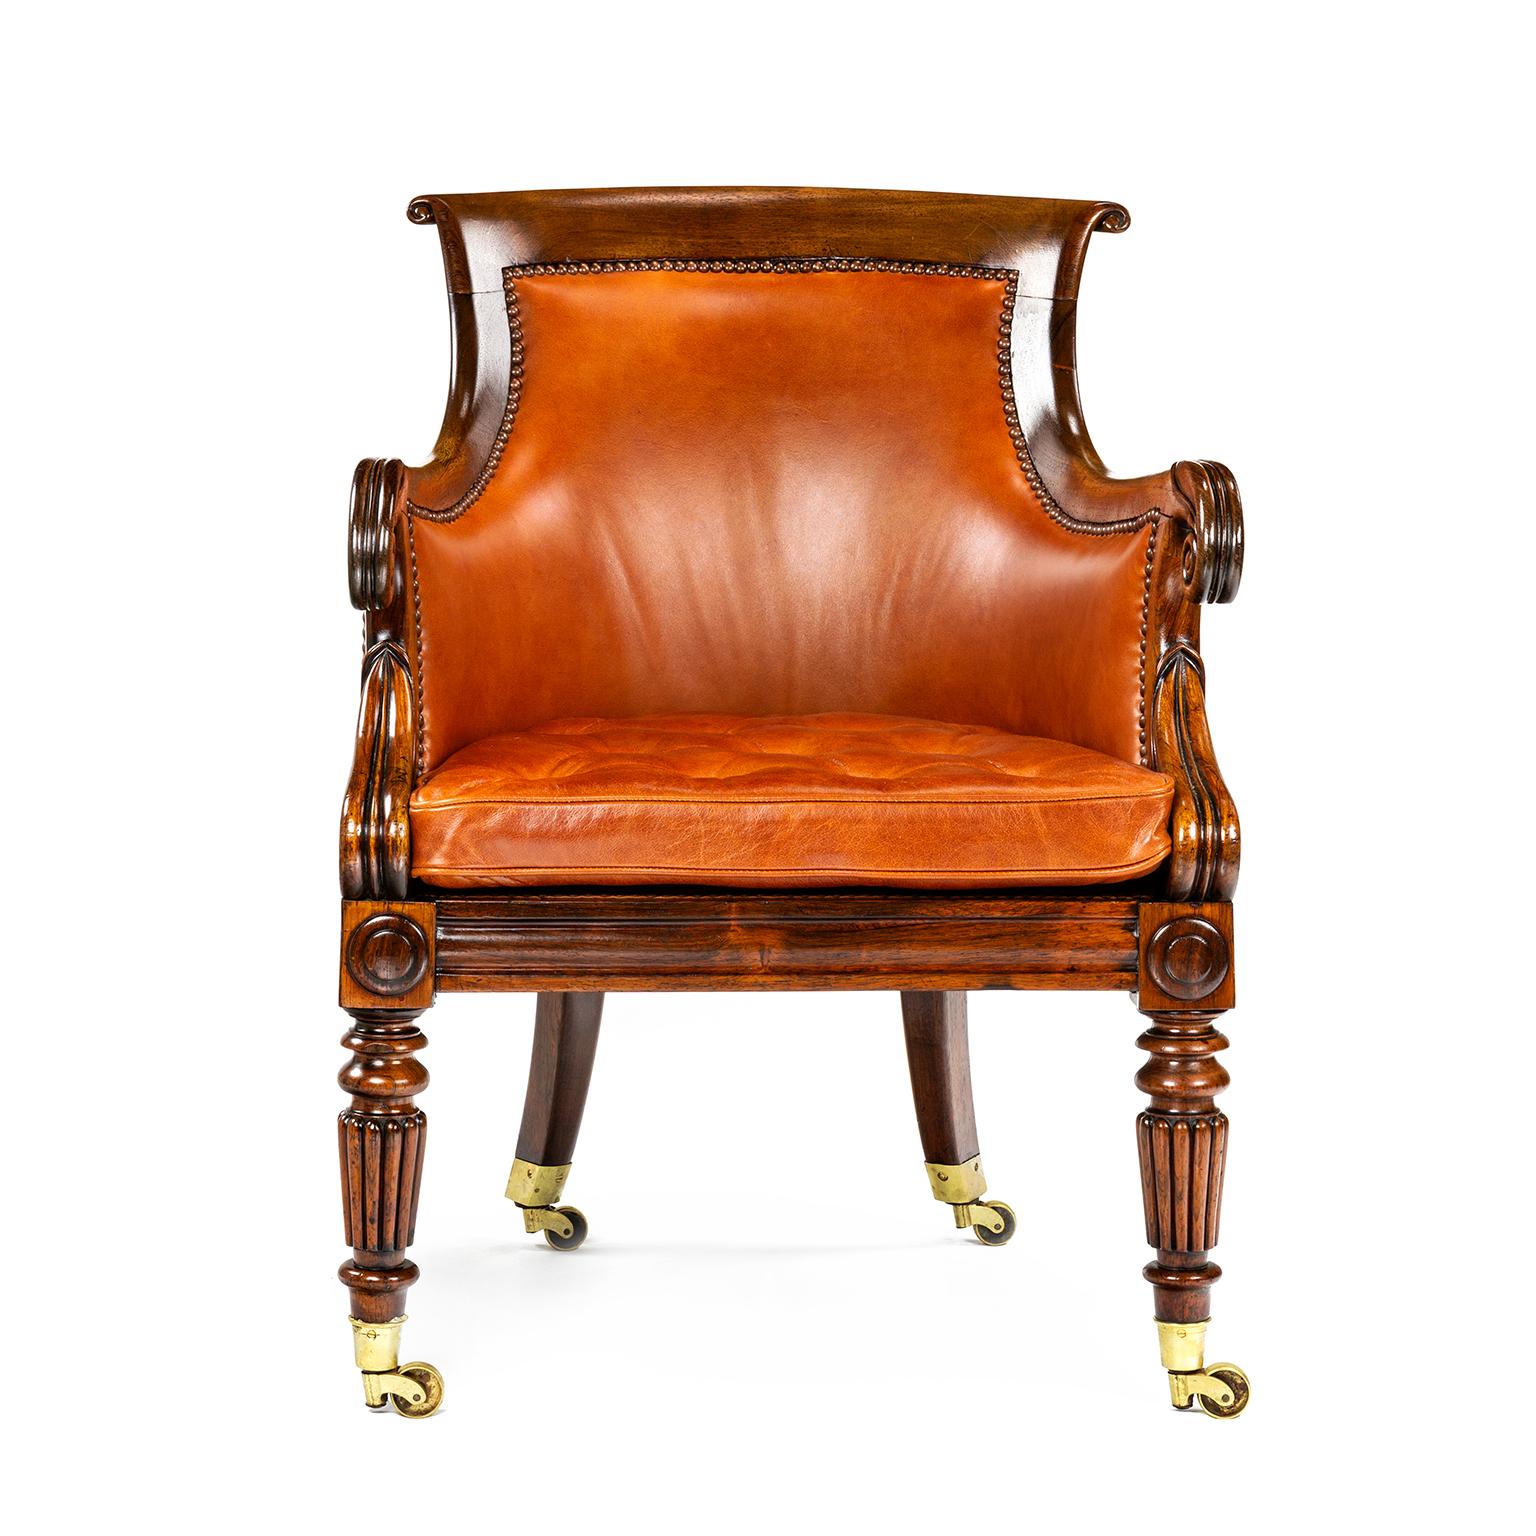 William IV bergère chair attributed to Gillows, the leather has recently been renewed and is in pristine condition.

Gillows of Lancaster and London, also known as Gillow & Co., was an English furniture making firm based in Lancaster, Lancashire,